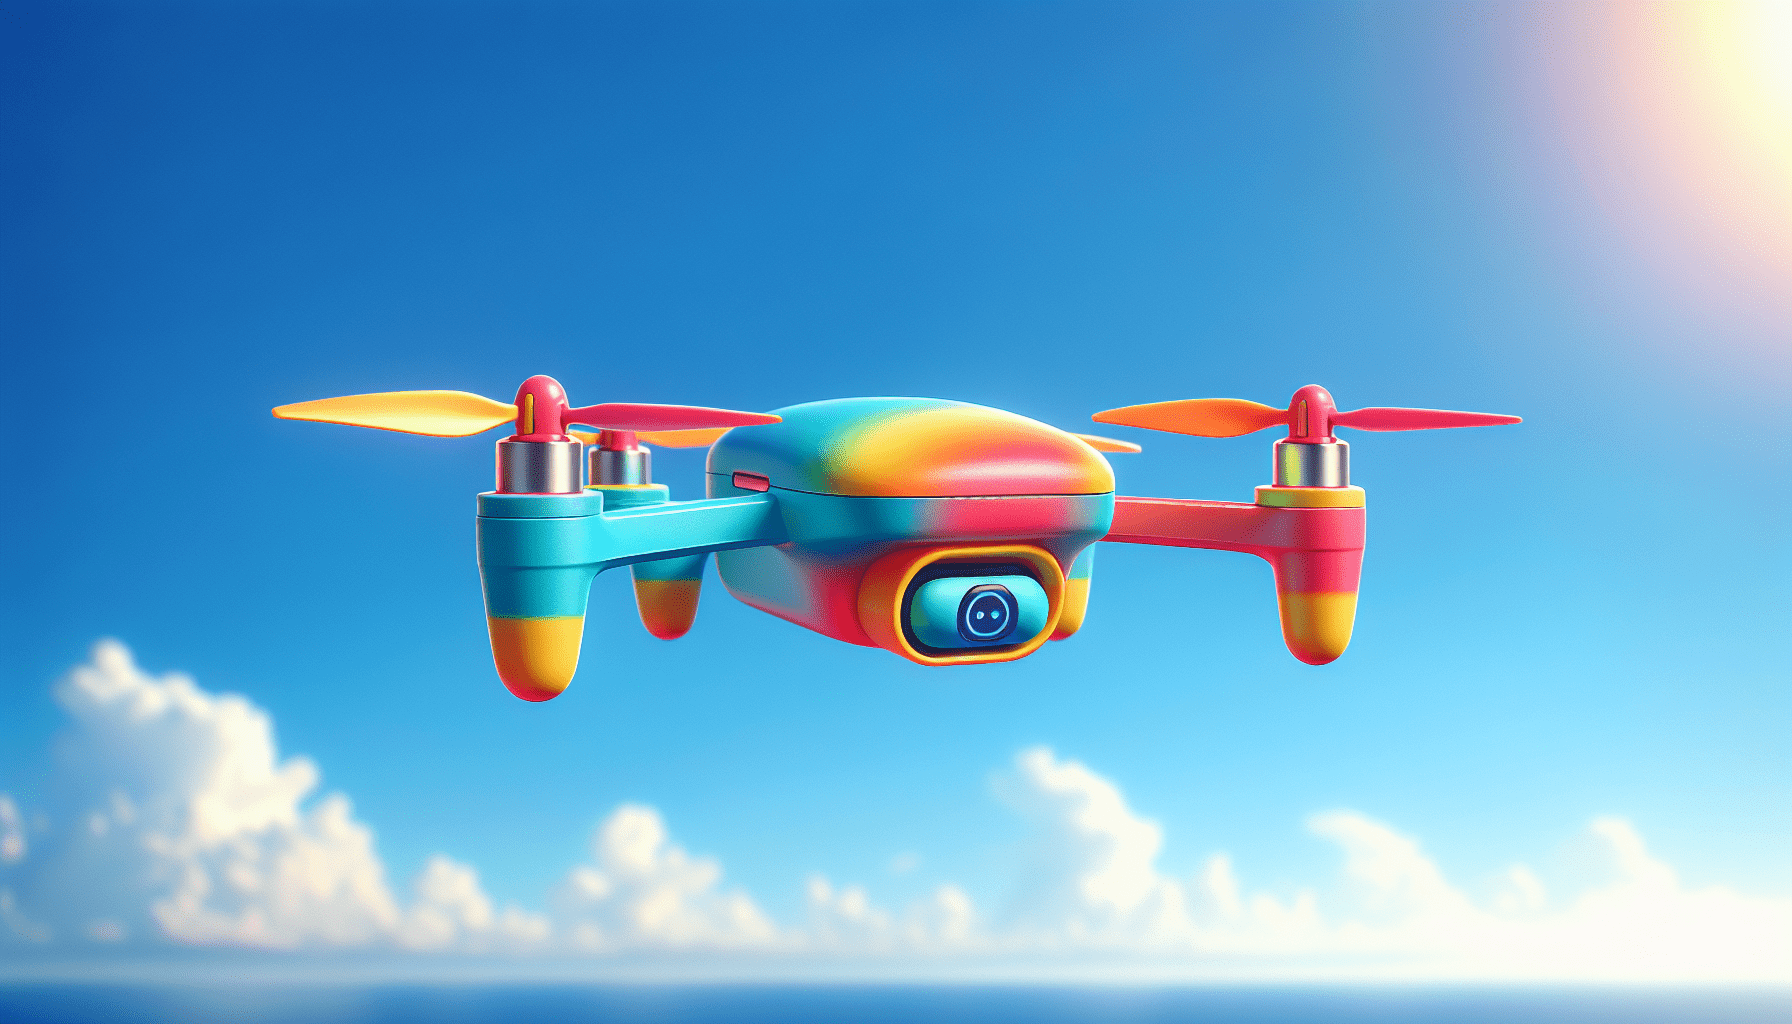 What Is The Best Drone For Kids?